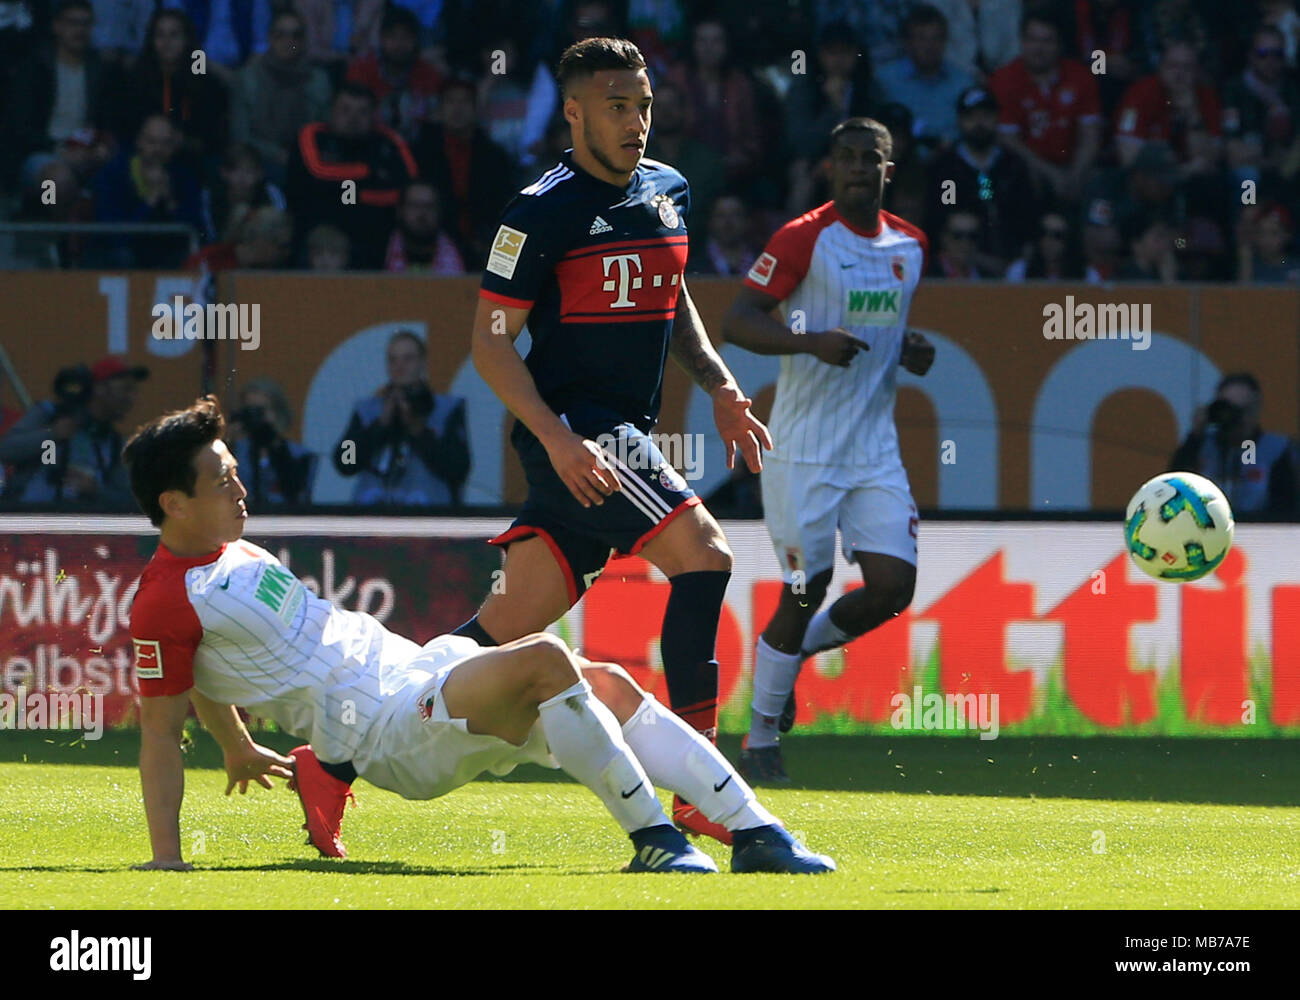 Augsburg, Germany. 7th Apr, 2018. Bayern Munich's Corentin Tolisso (Top) vies with Augsburg's Koo Ja-cheol during a German Bundesliga match between FC Augsburg and Bayern Munich, in Augsburg, Germany, on April 7, 2018. Bayern Munich won 4-1 to clinch its sixth consecutive Bundeslisga title ahead of schedule at the 29th round on Saturday. Credit: Philippe Ruiz/Xinhua/Alamy Live News Stock Photo